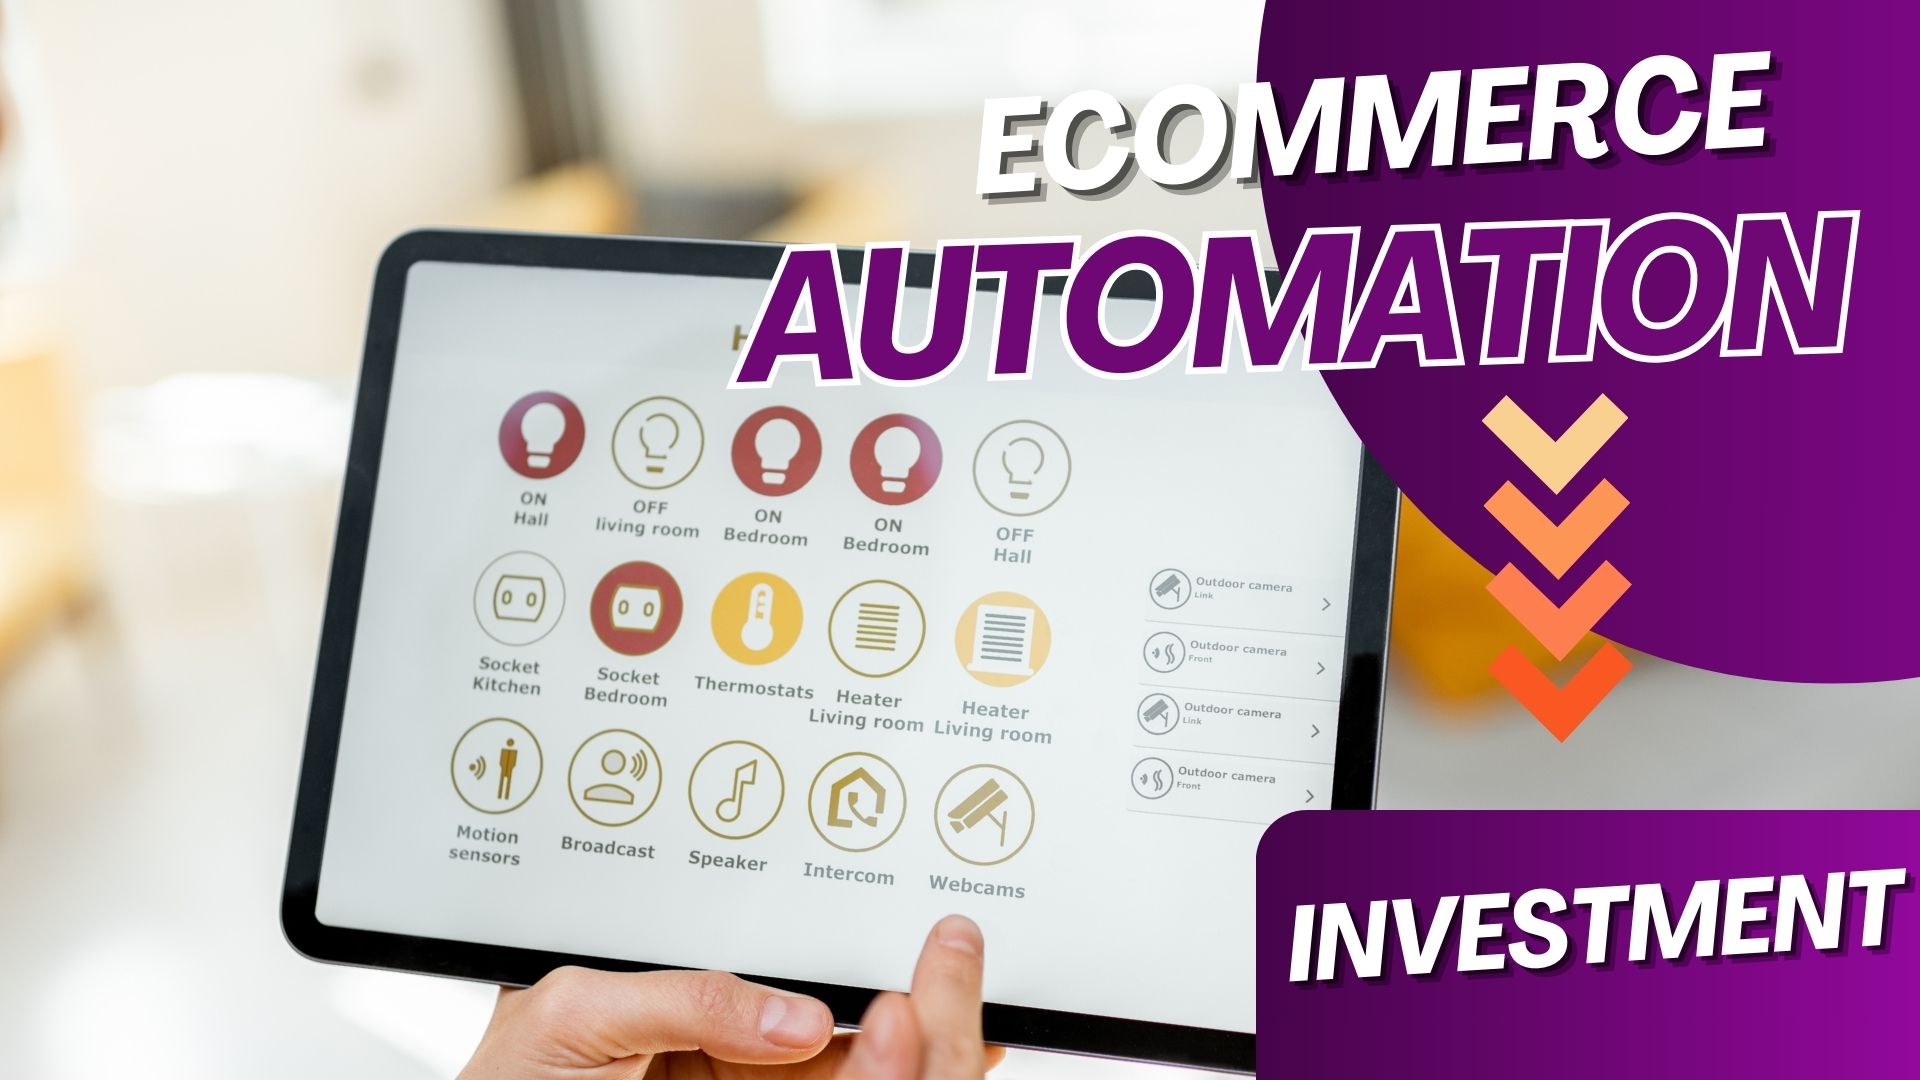 E-Commerce Automation Investment